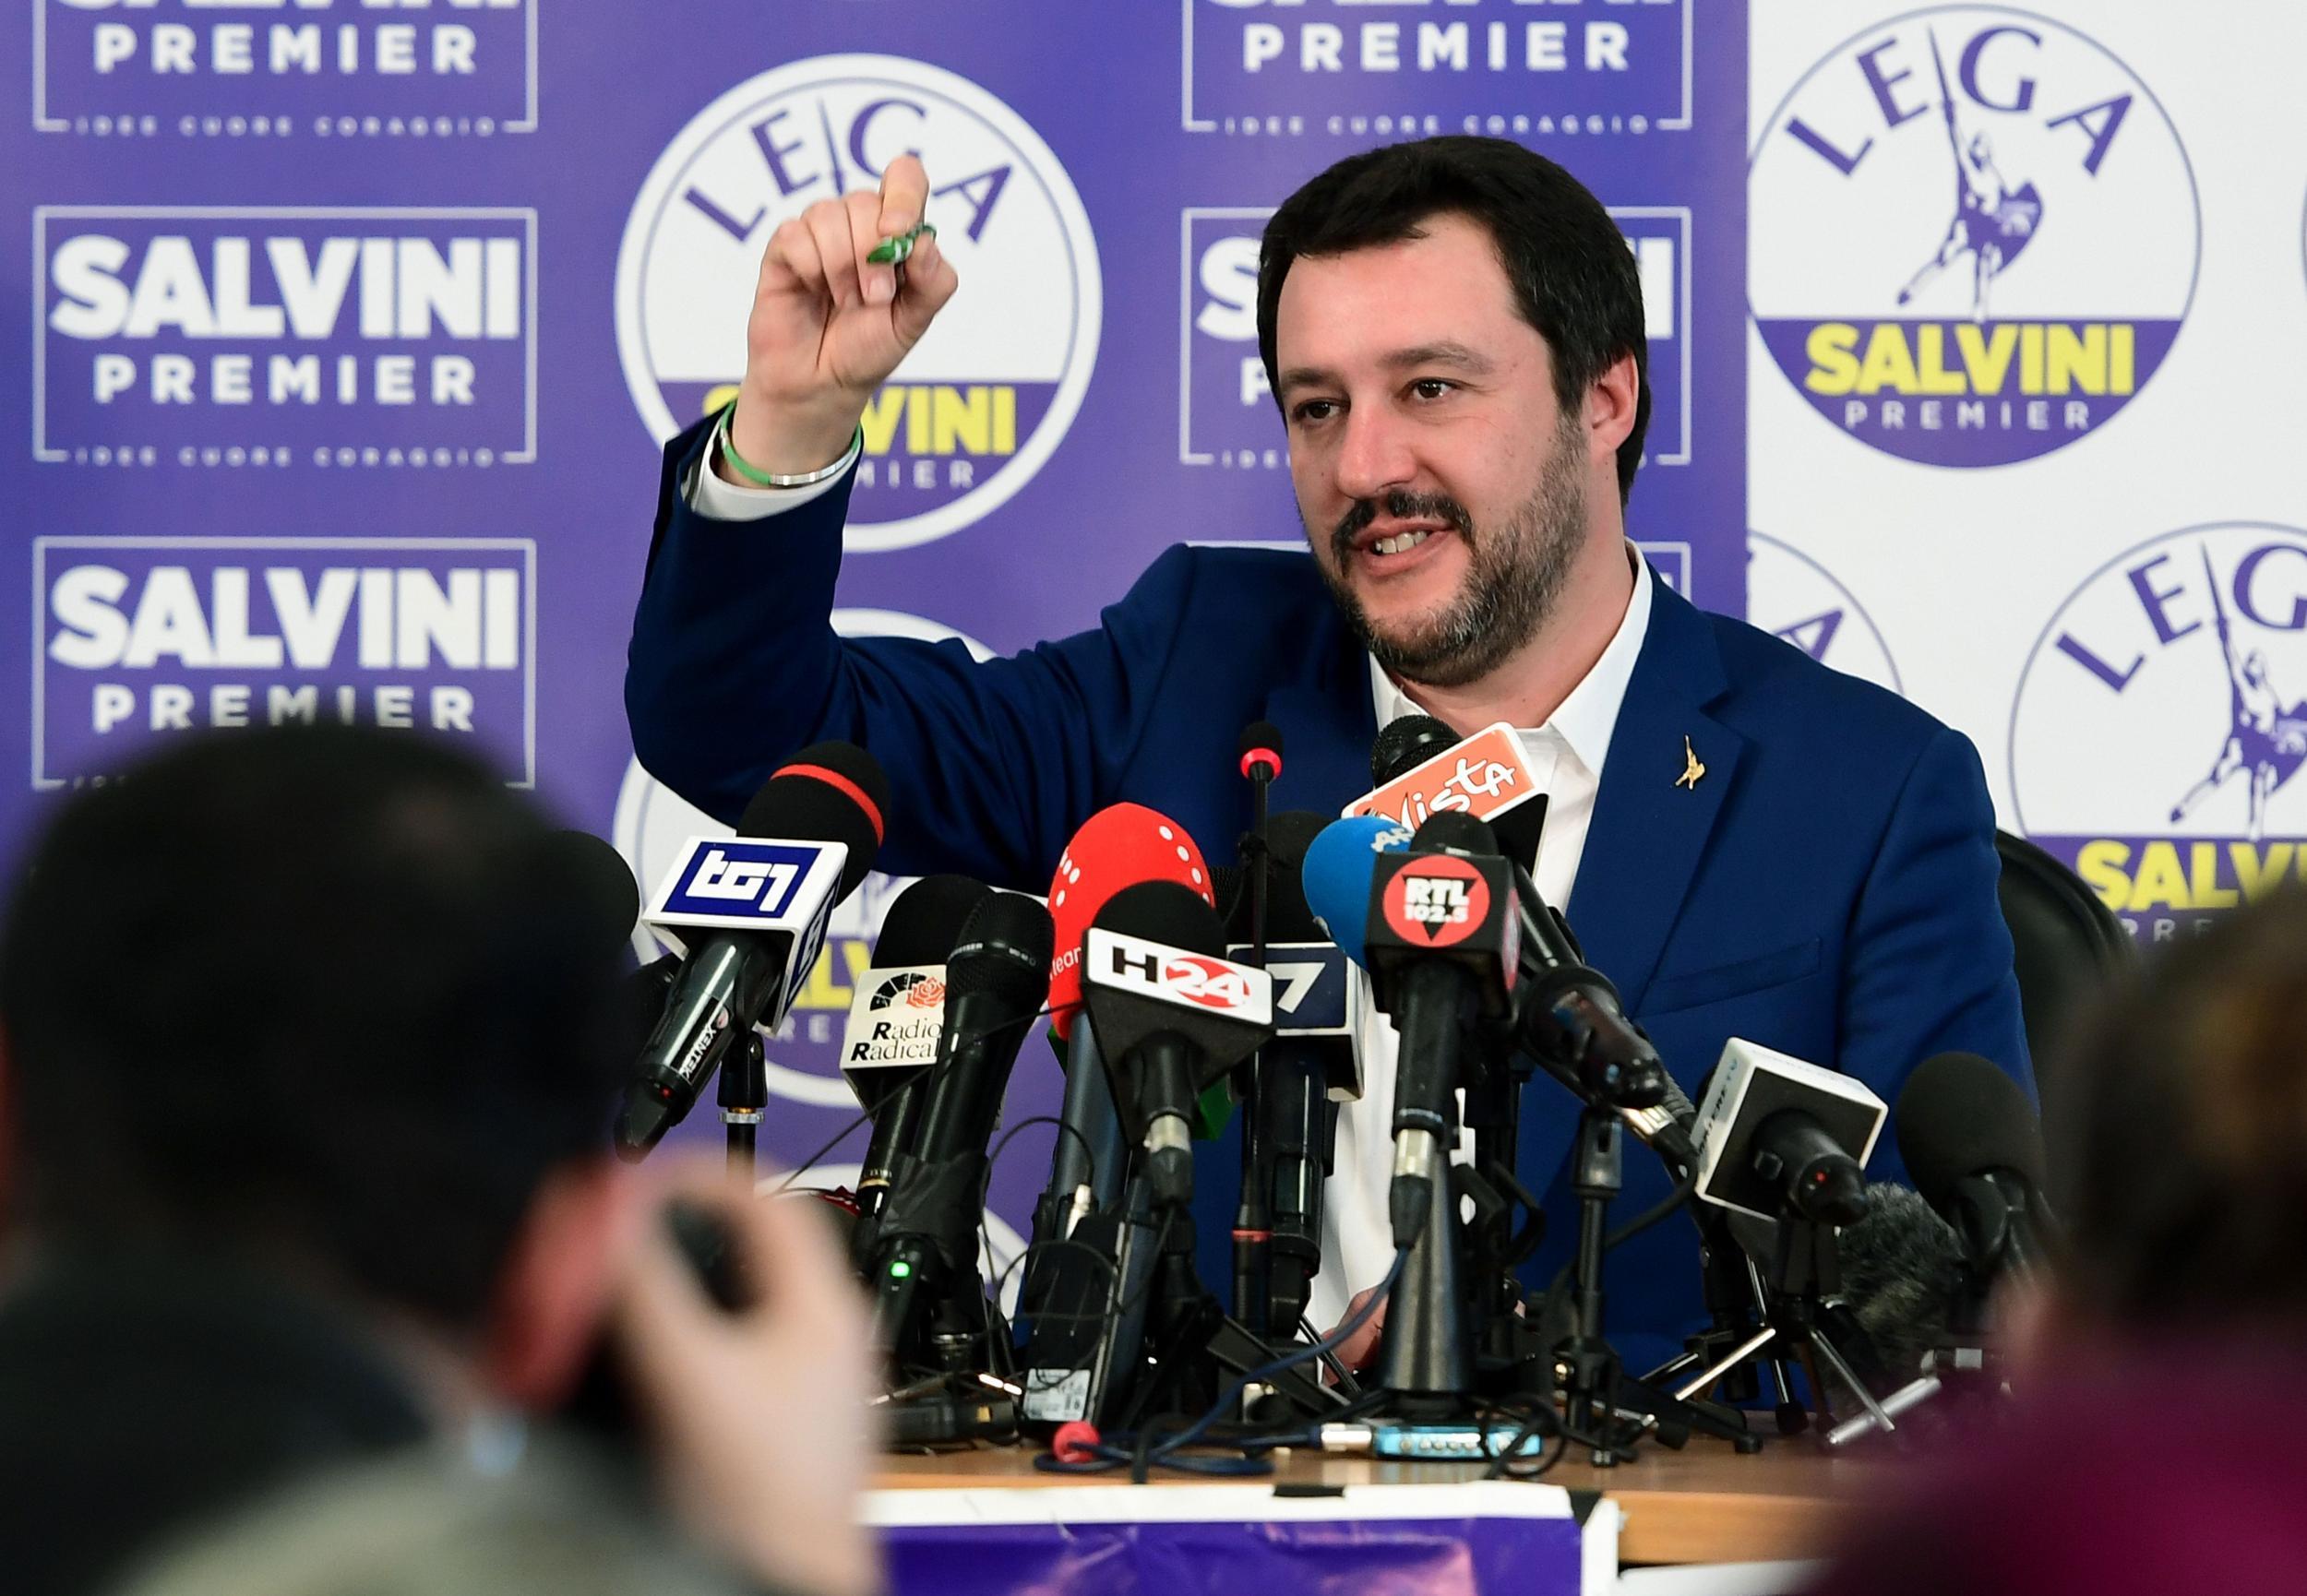 Lega far right party leader Matteo Salvini could join the government